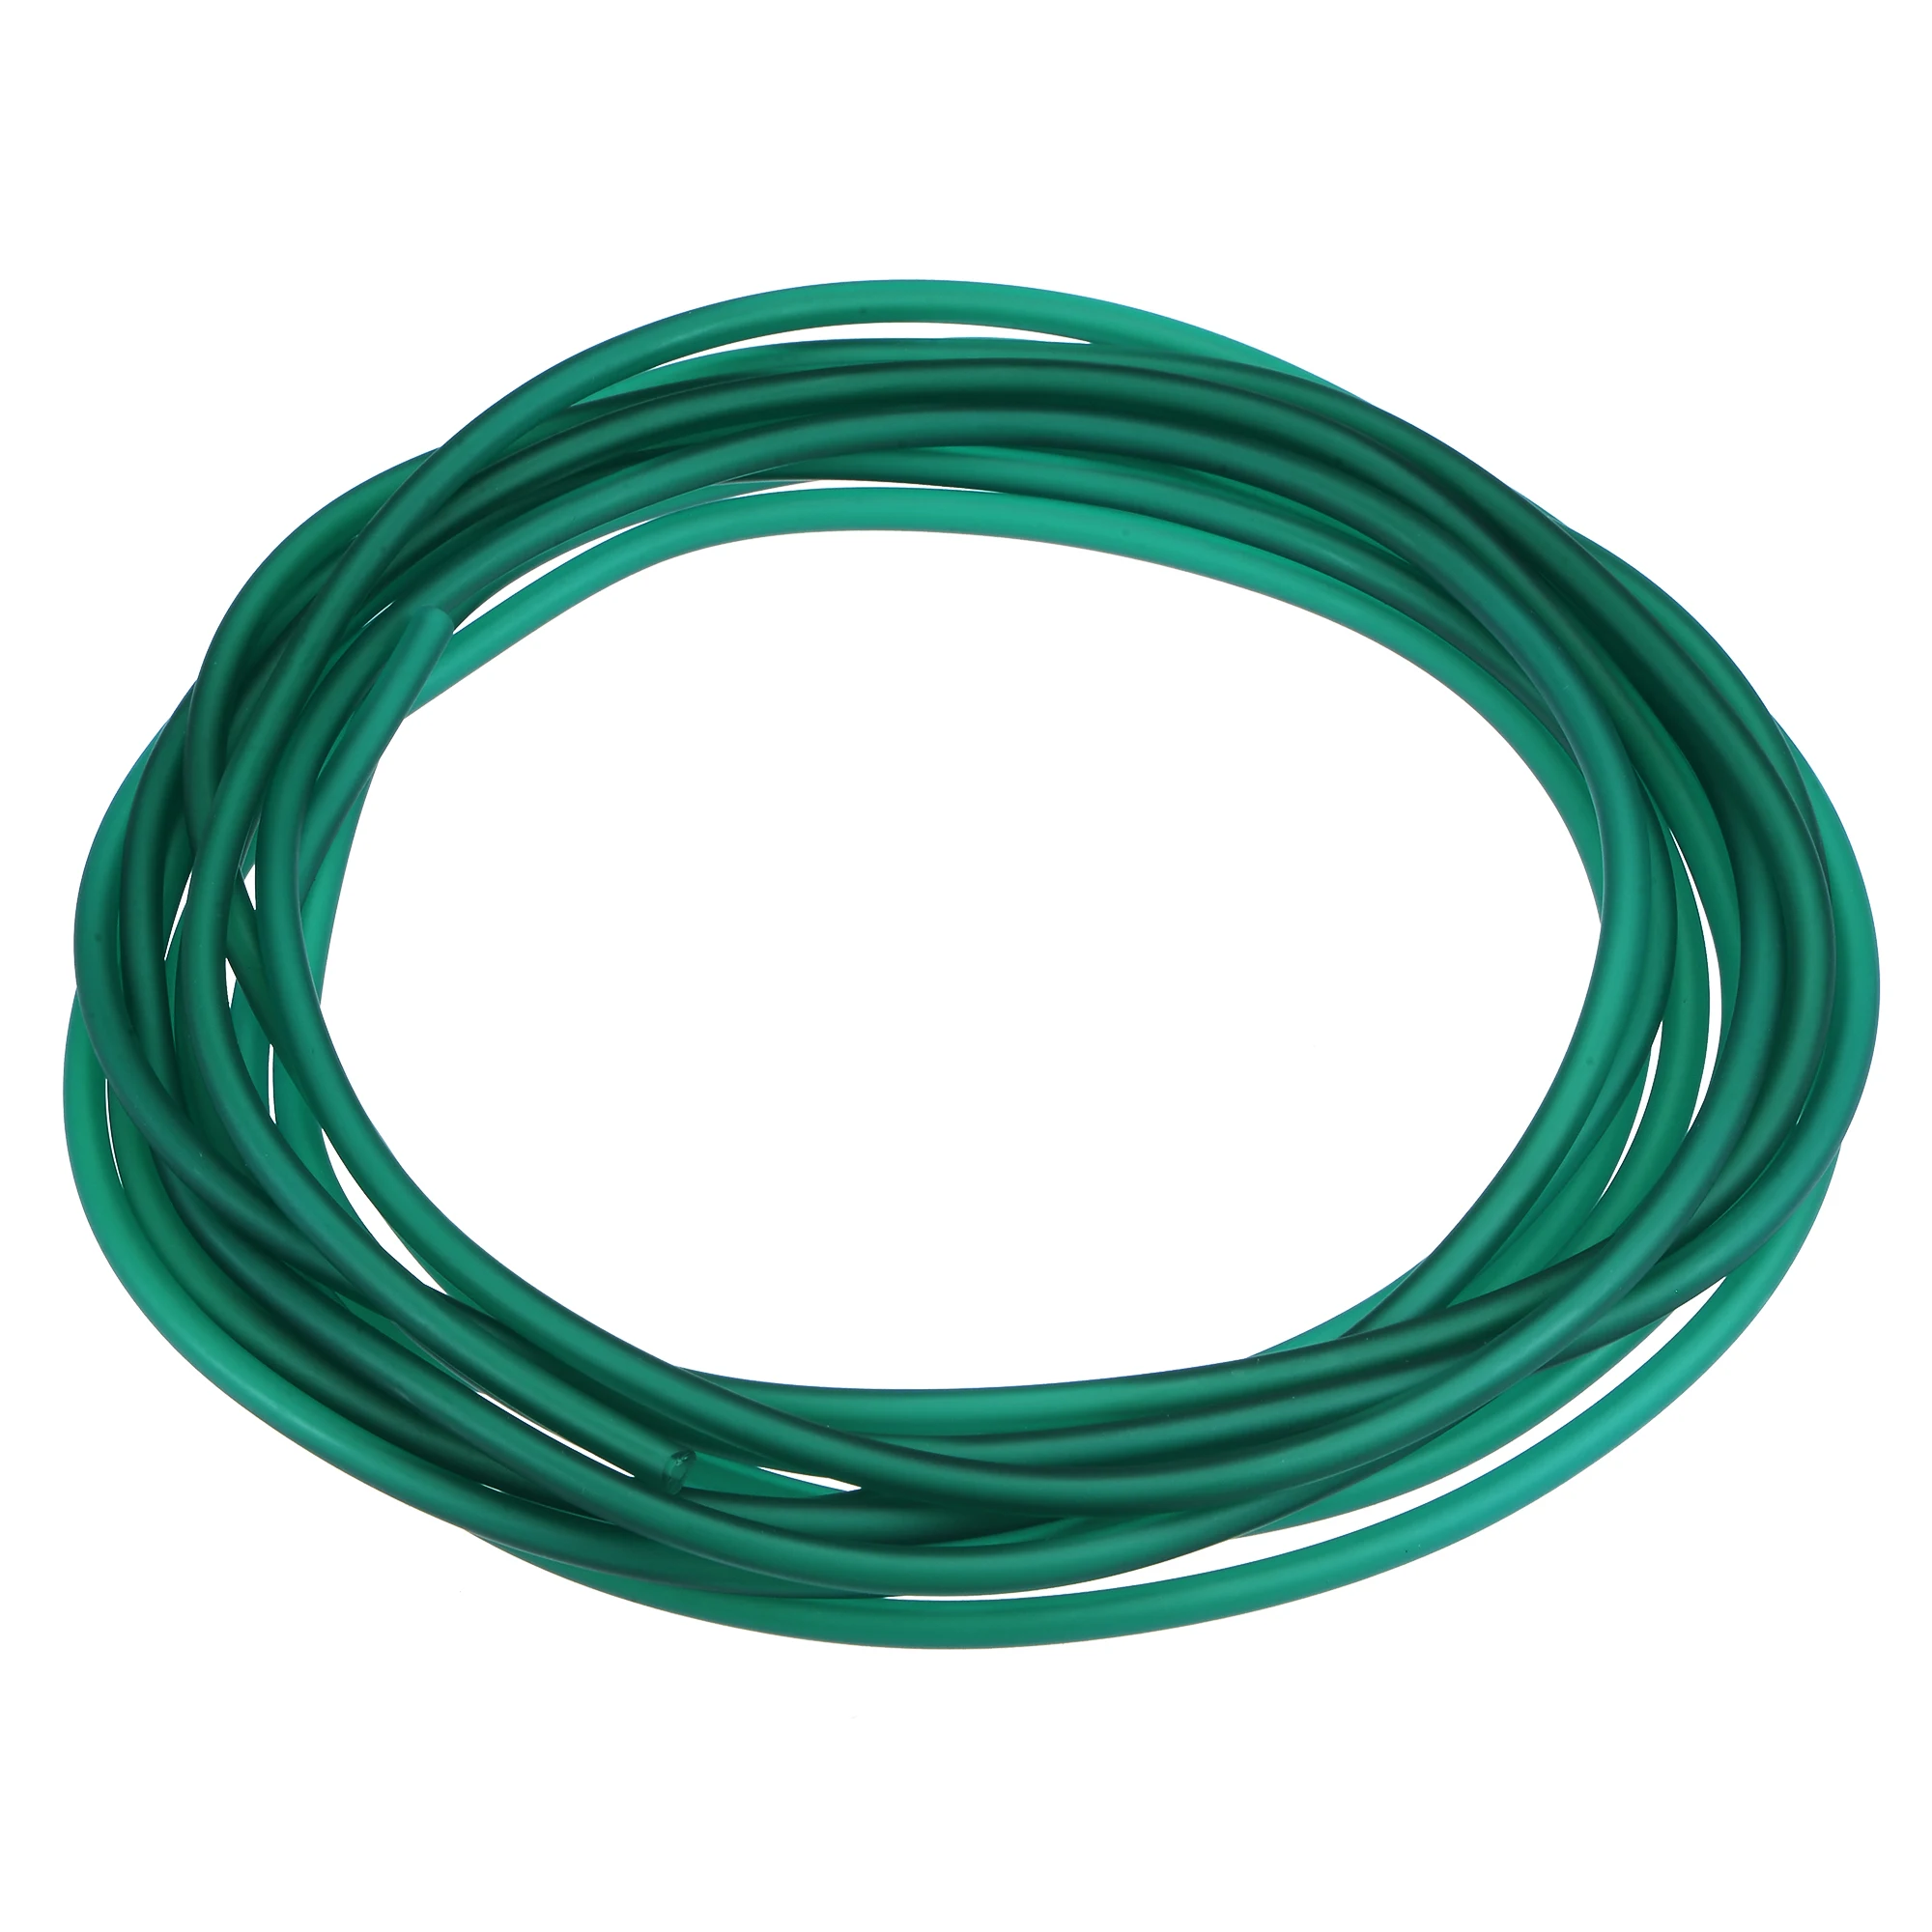 

Uxcell Latex Tubing 1/16-inch ID 3/16-inch OD 16ft Elastic Rubber Hose Green